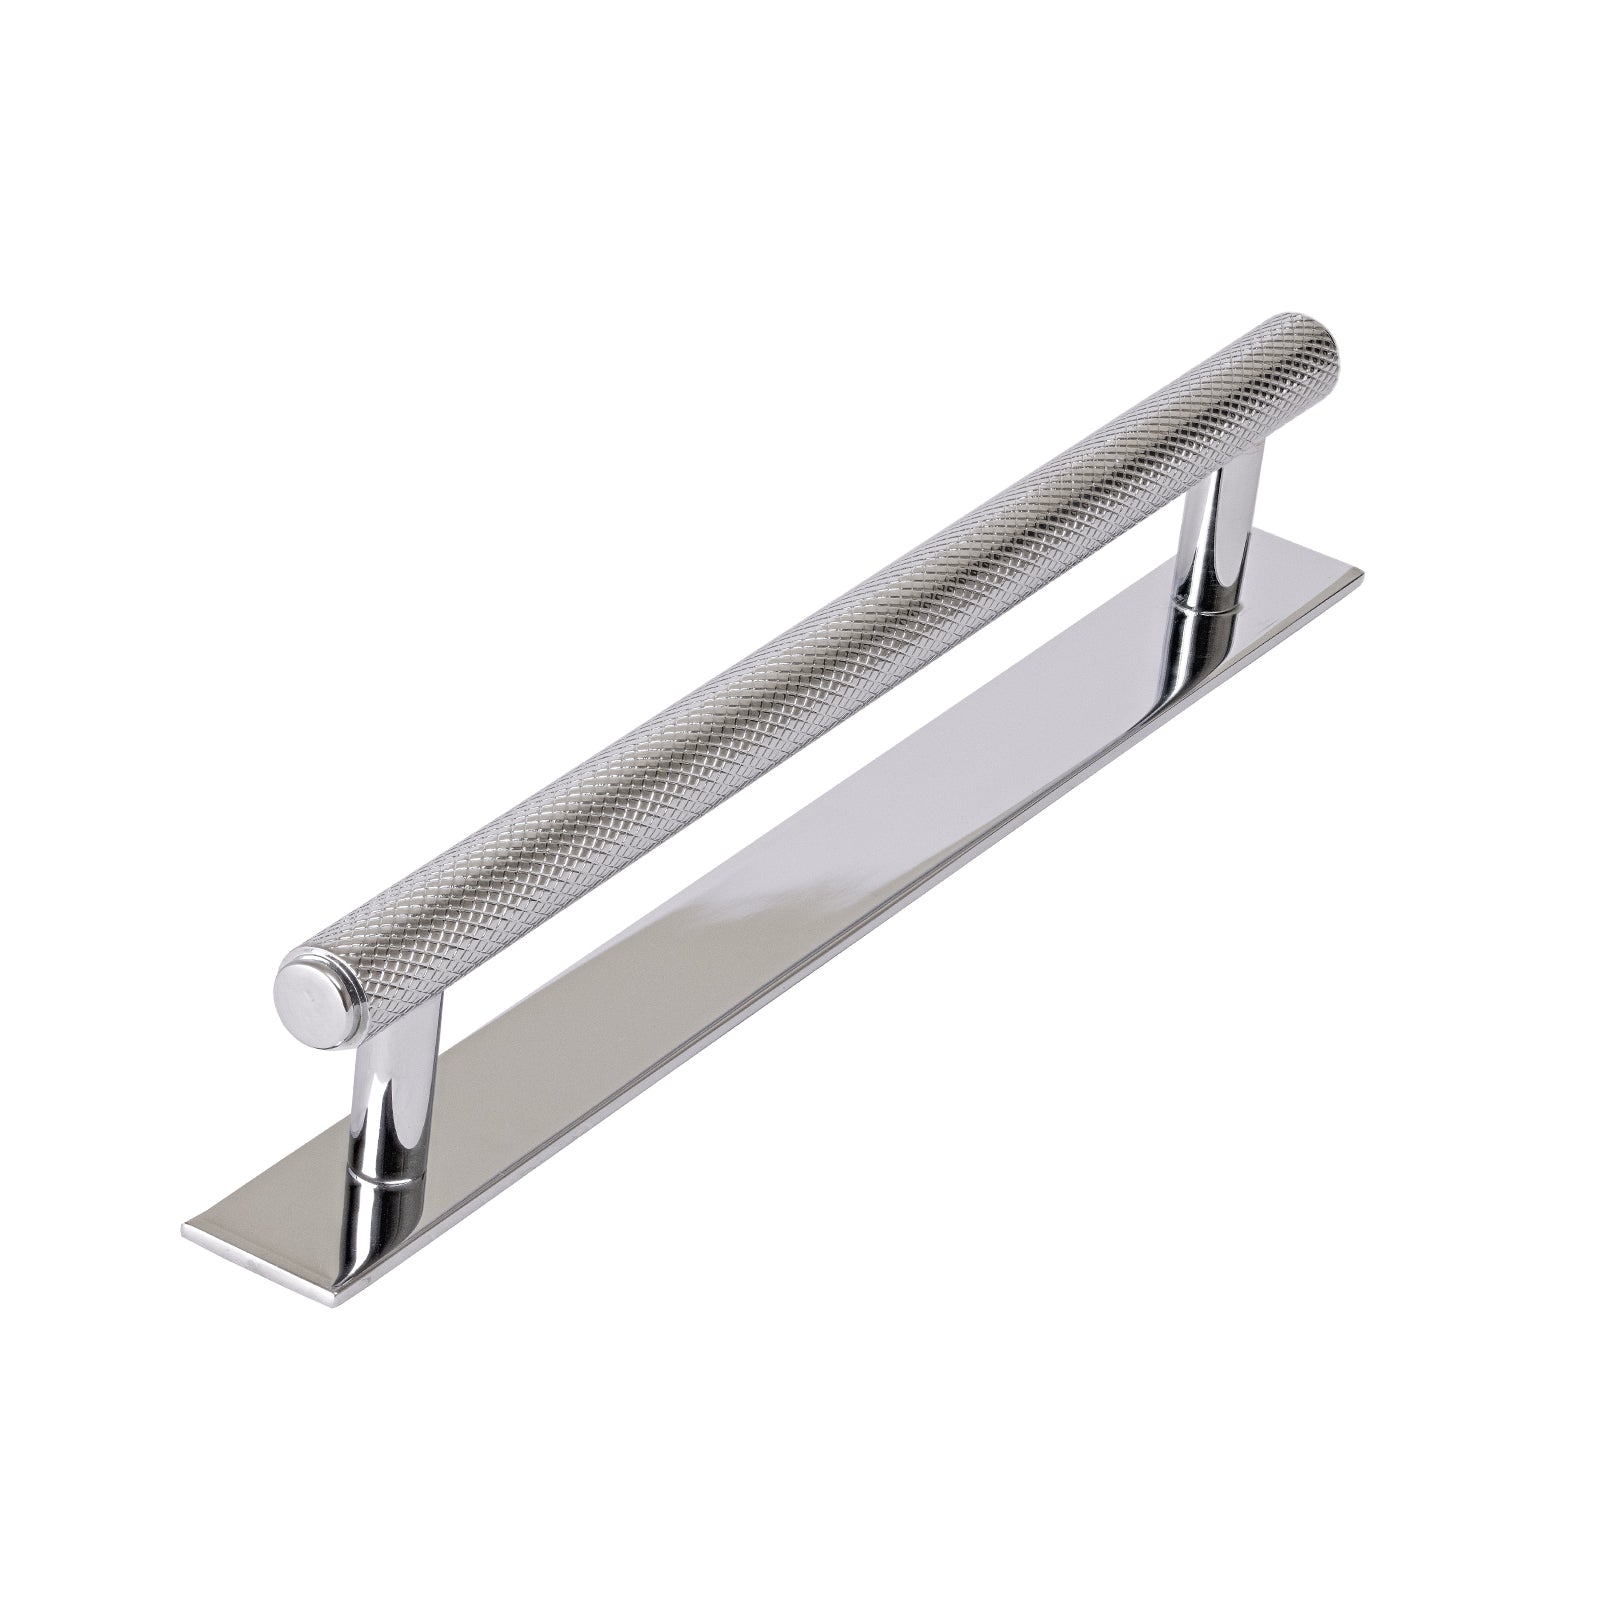 chrome cupboard handles, large knurled pull handle, kitchen pull handles on backplate